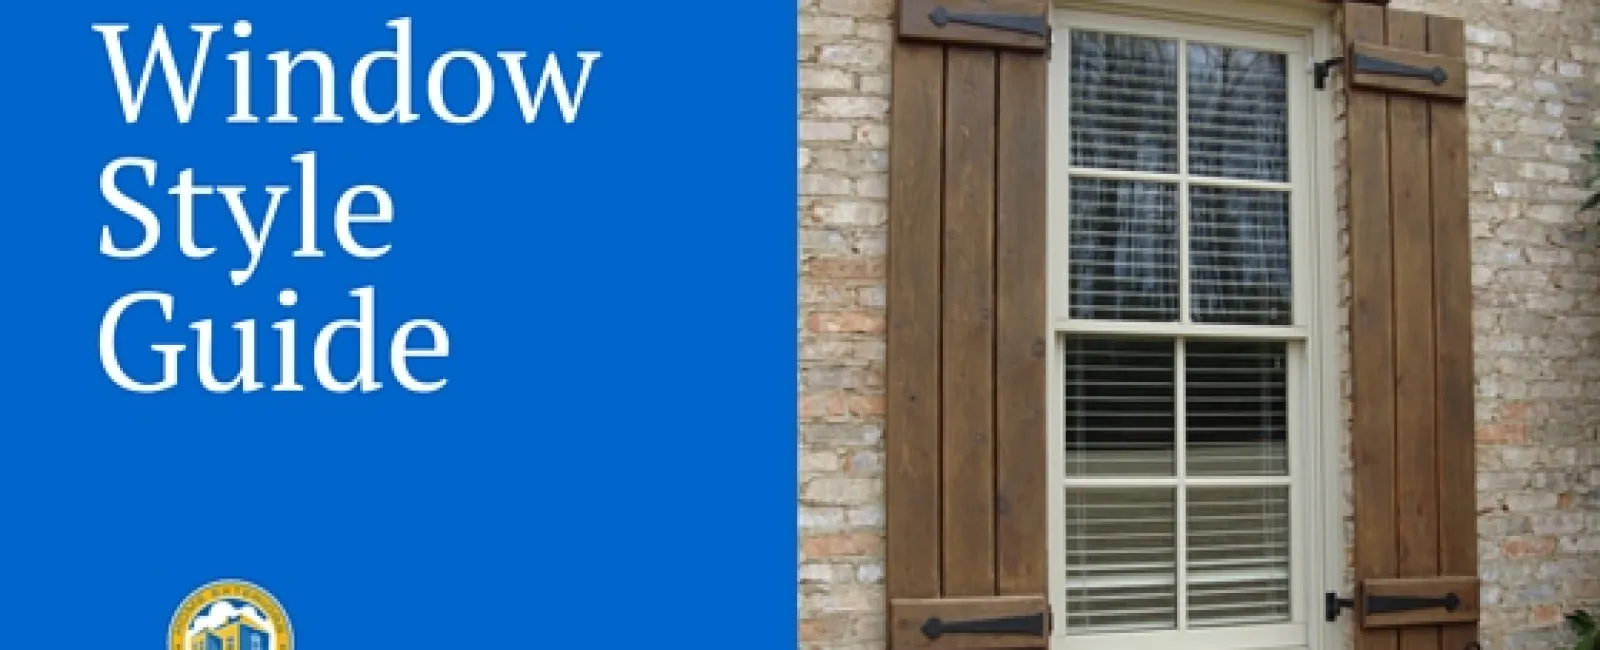 Popular Window Styles for your Home Remodeling Project